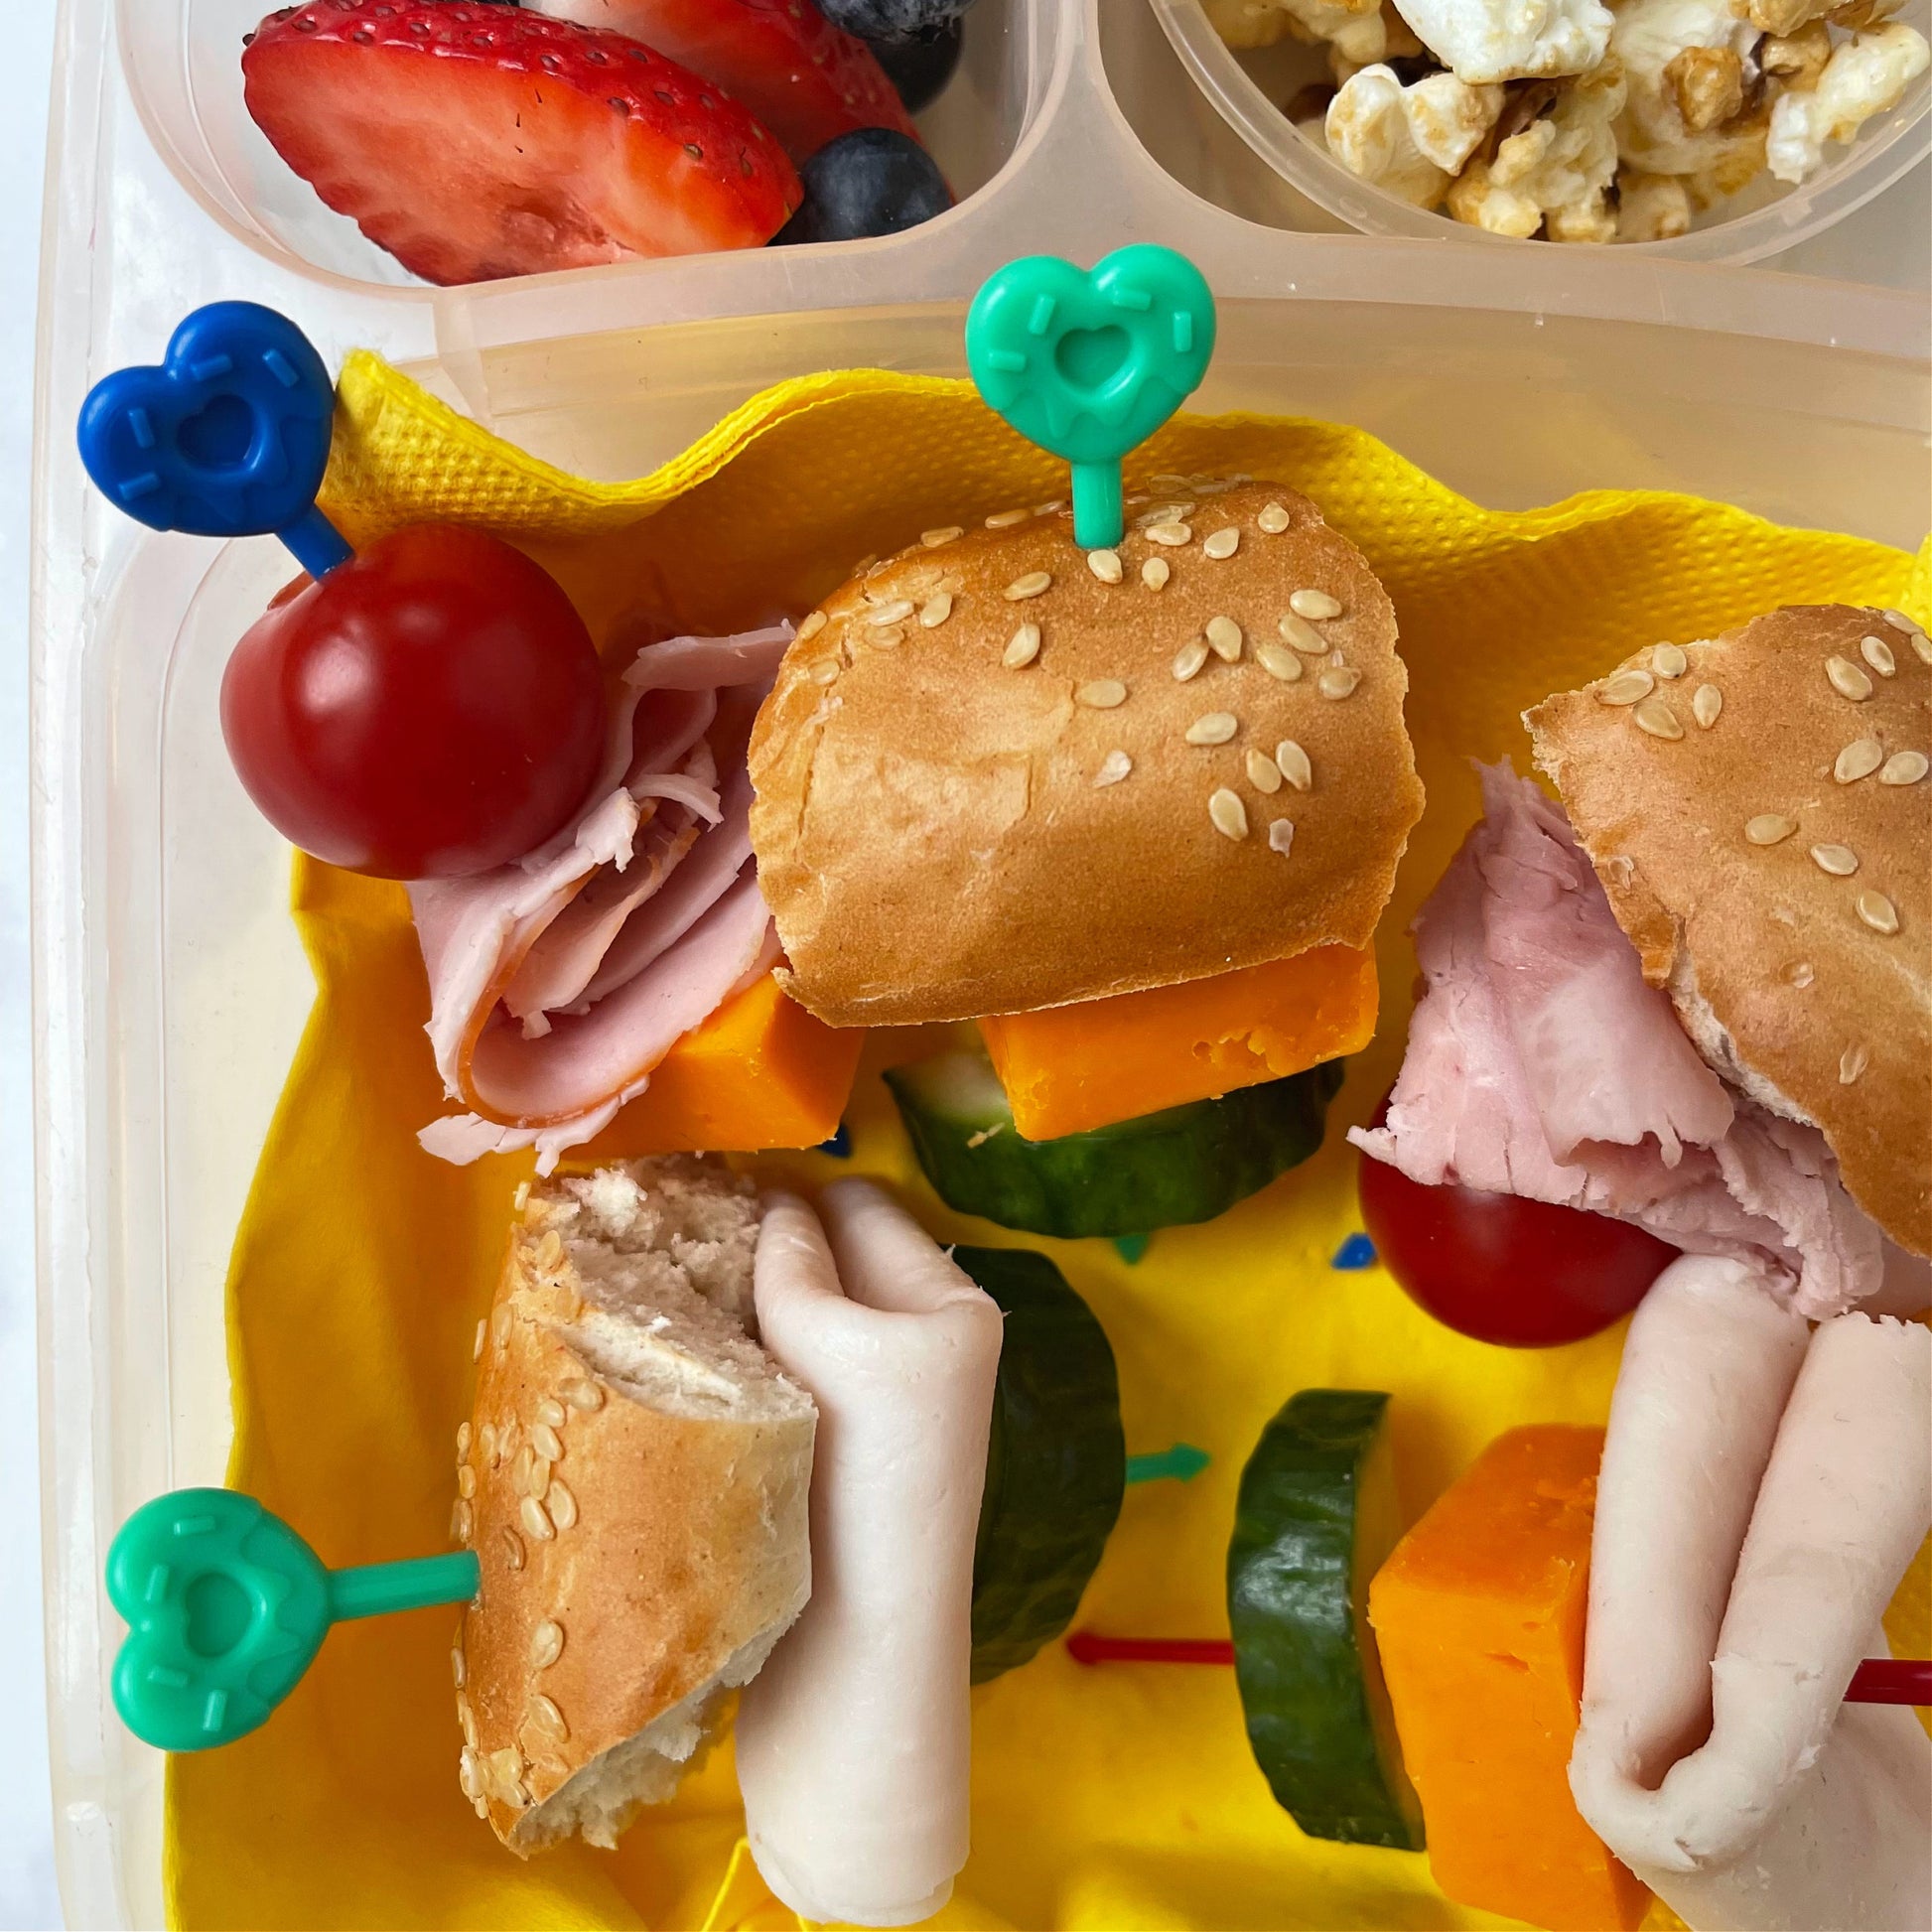 Four Pick Sticks bering used for bagel slices, cheese, ham, cucumber and tomato in a plastic lunchbox.